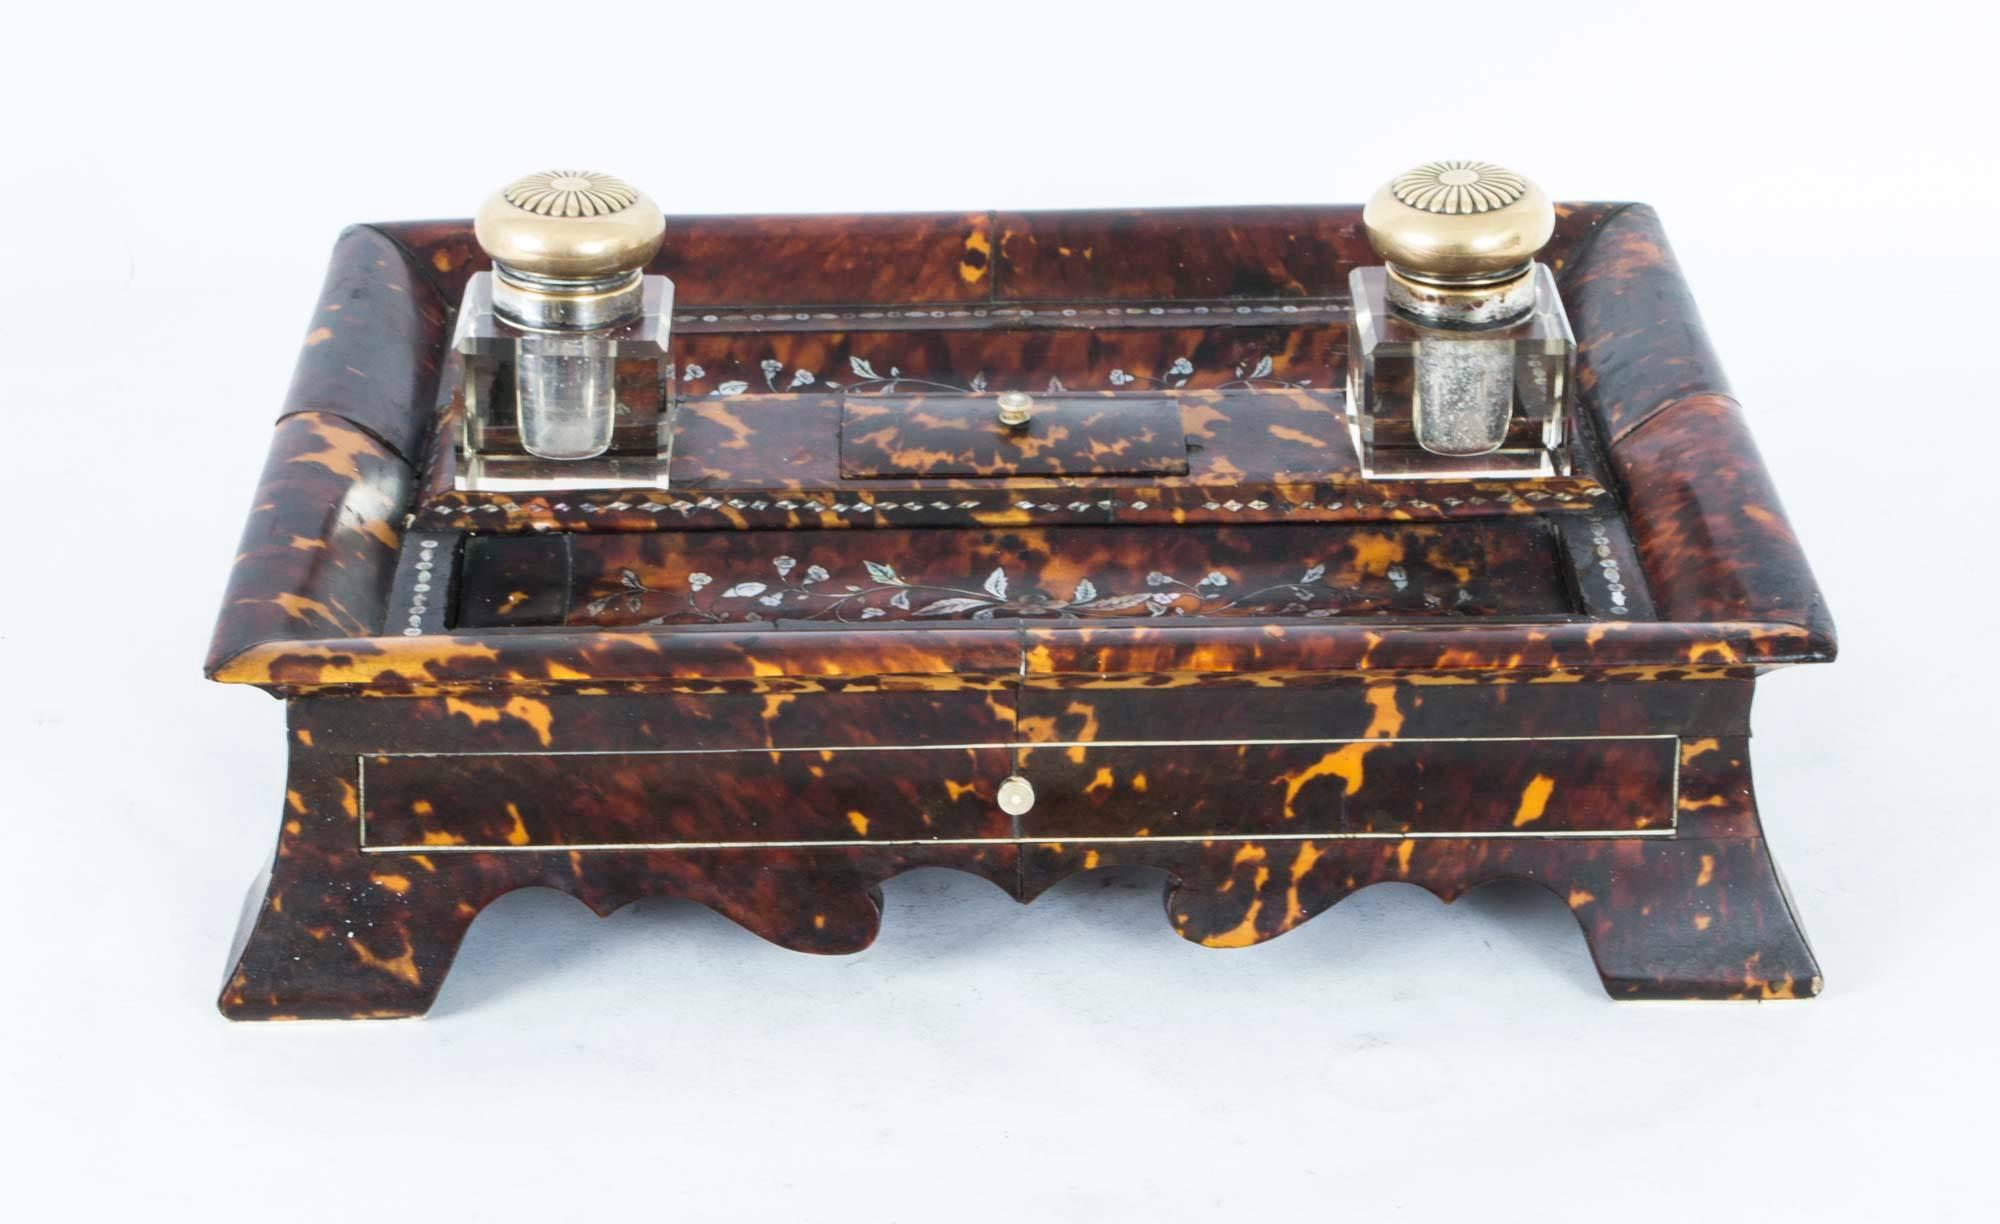 This is a lovely antique French mother-of-pearl marquetry and red Boulle encrier, or inkstand, circa 1830 in date.

The encrier comprises two glass inkwells and a lidded stamp box with a sunken well. It has exquisite inlaid mother-of-pearl Boulle